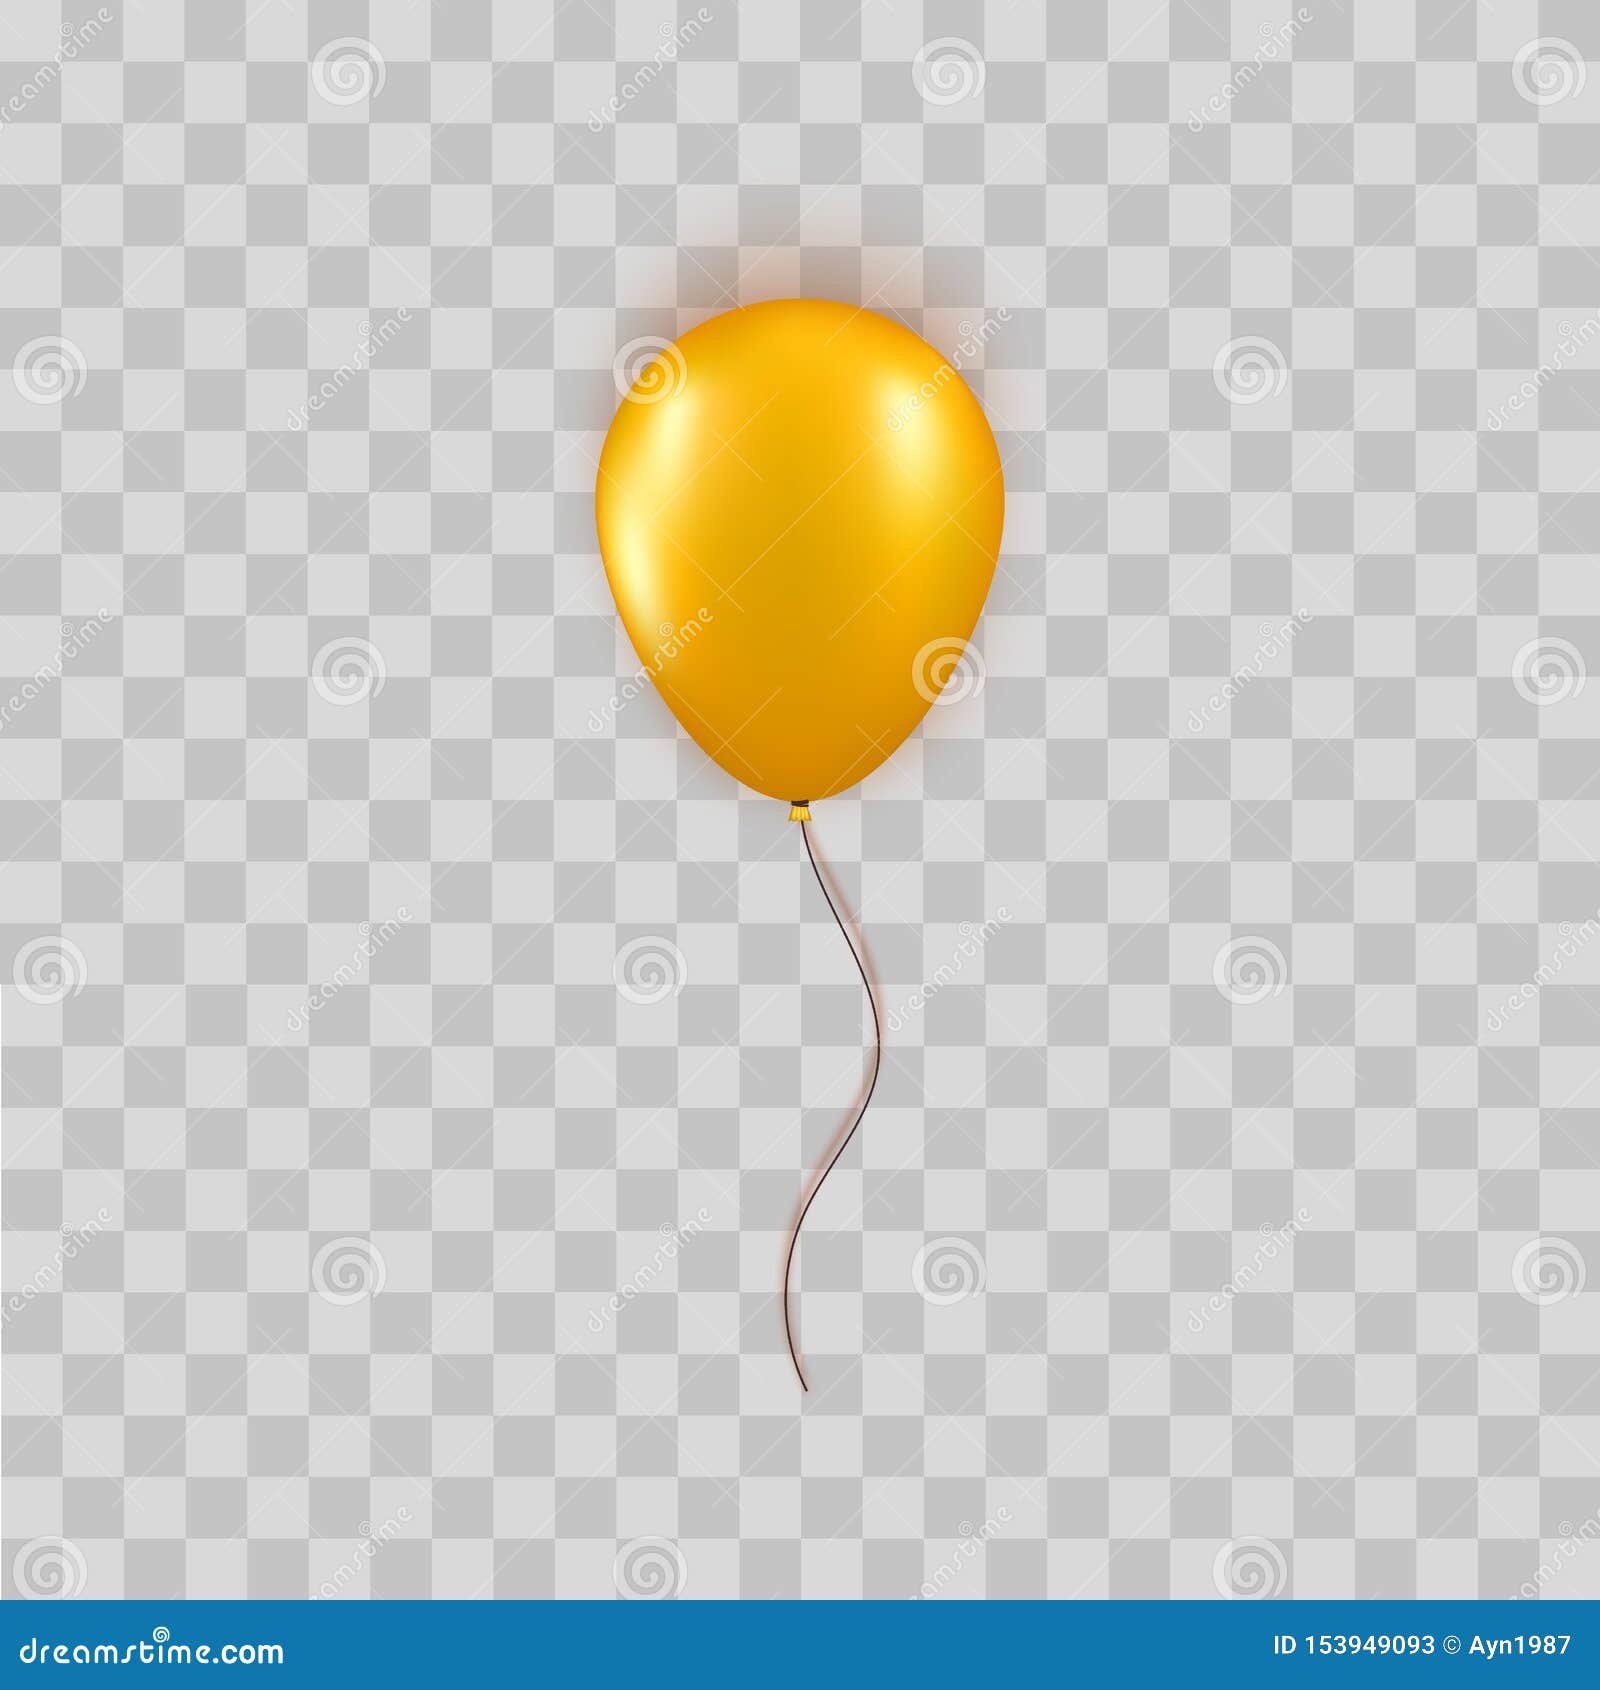 Balloon isolated on transparent background. Vector realistic gold